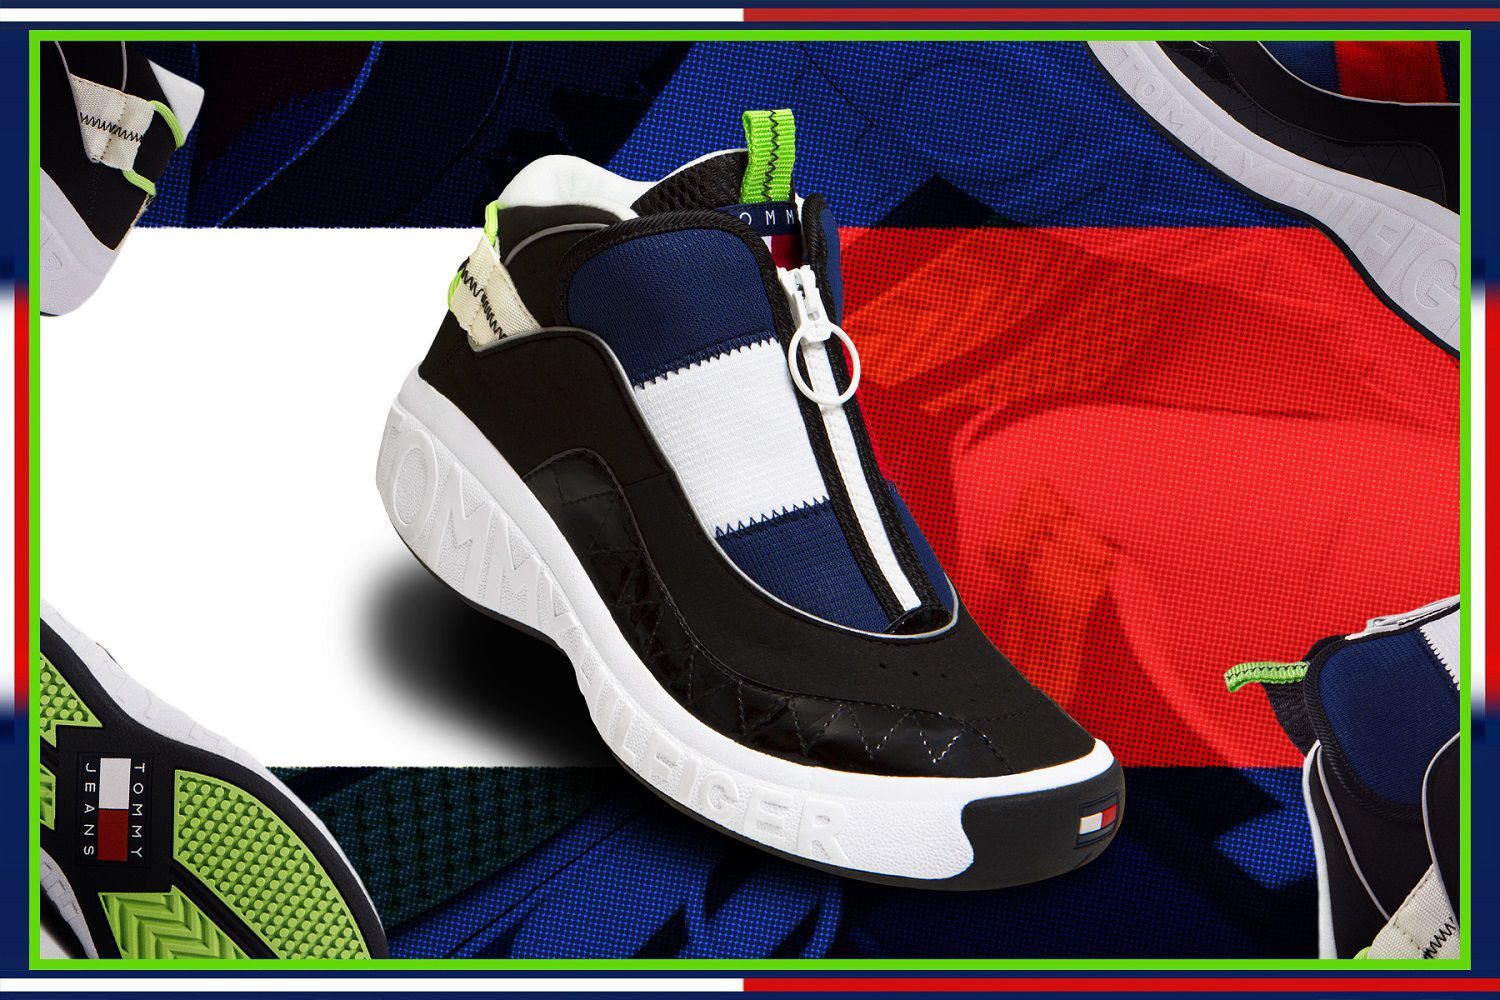 Tommy Hilfiger Tommy Jeans Fly Sneaker Retro